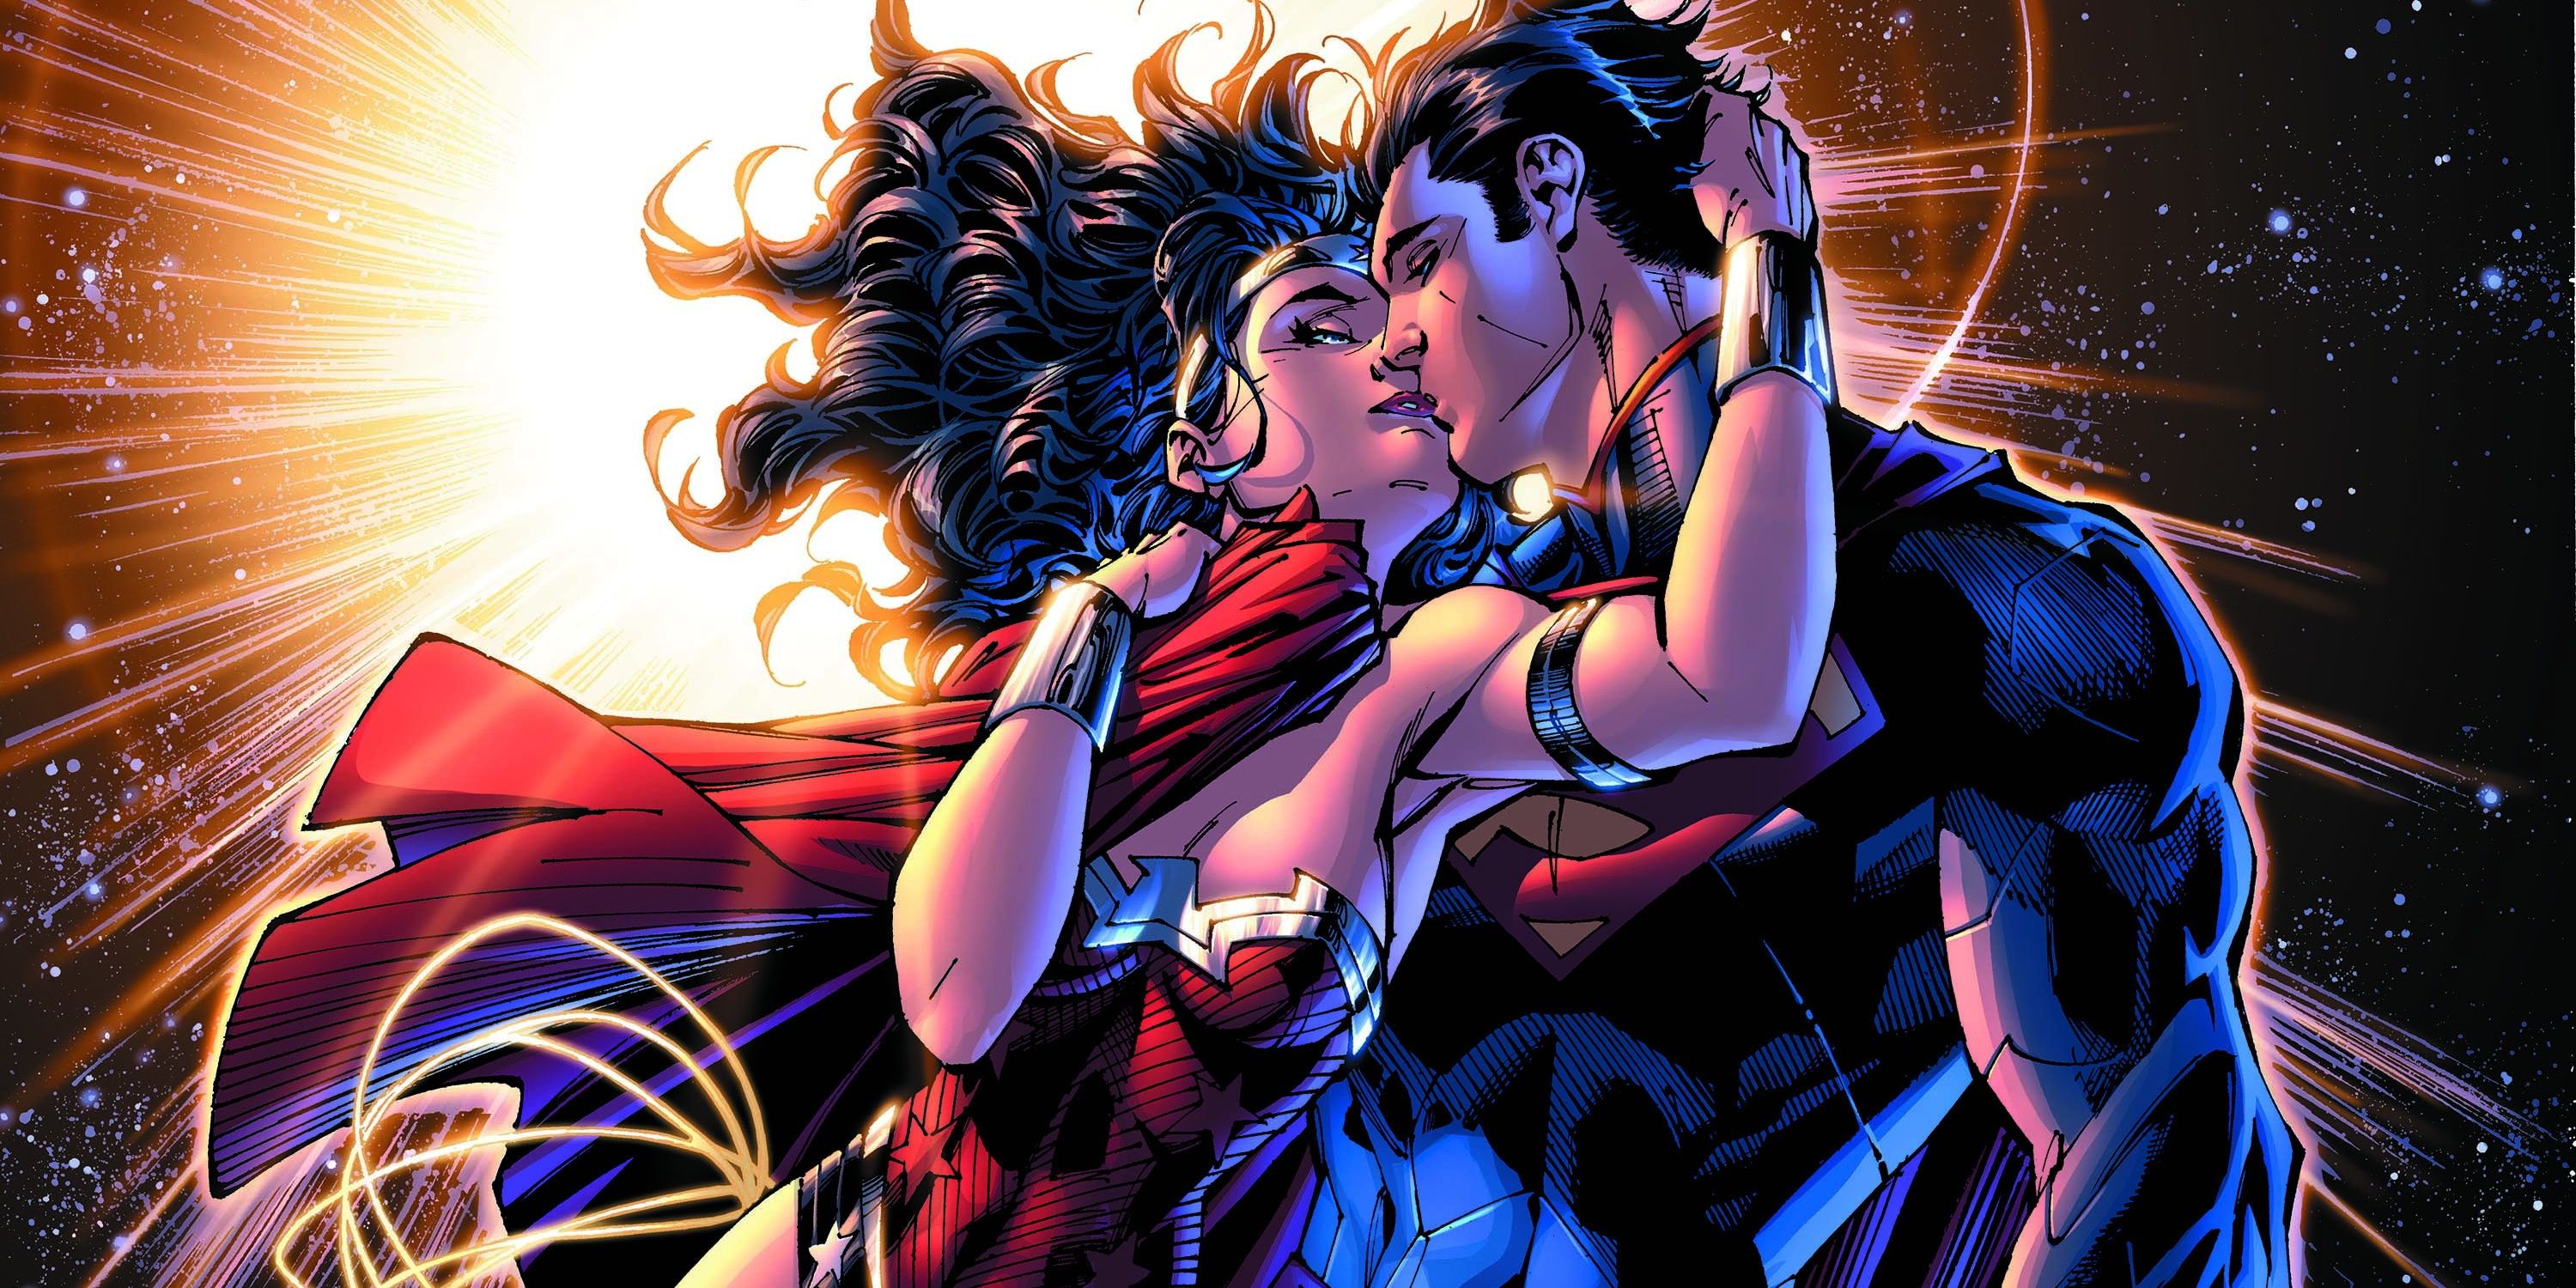 Superman and Wonder Woman kissing in space